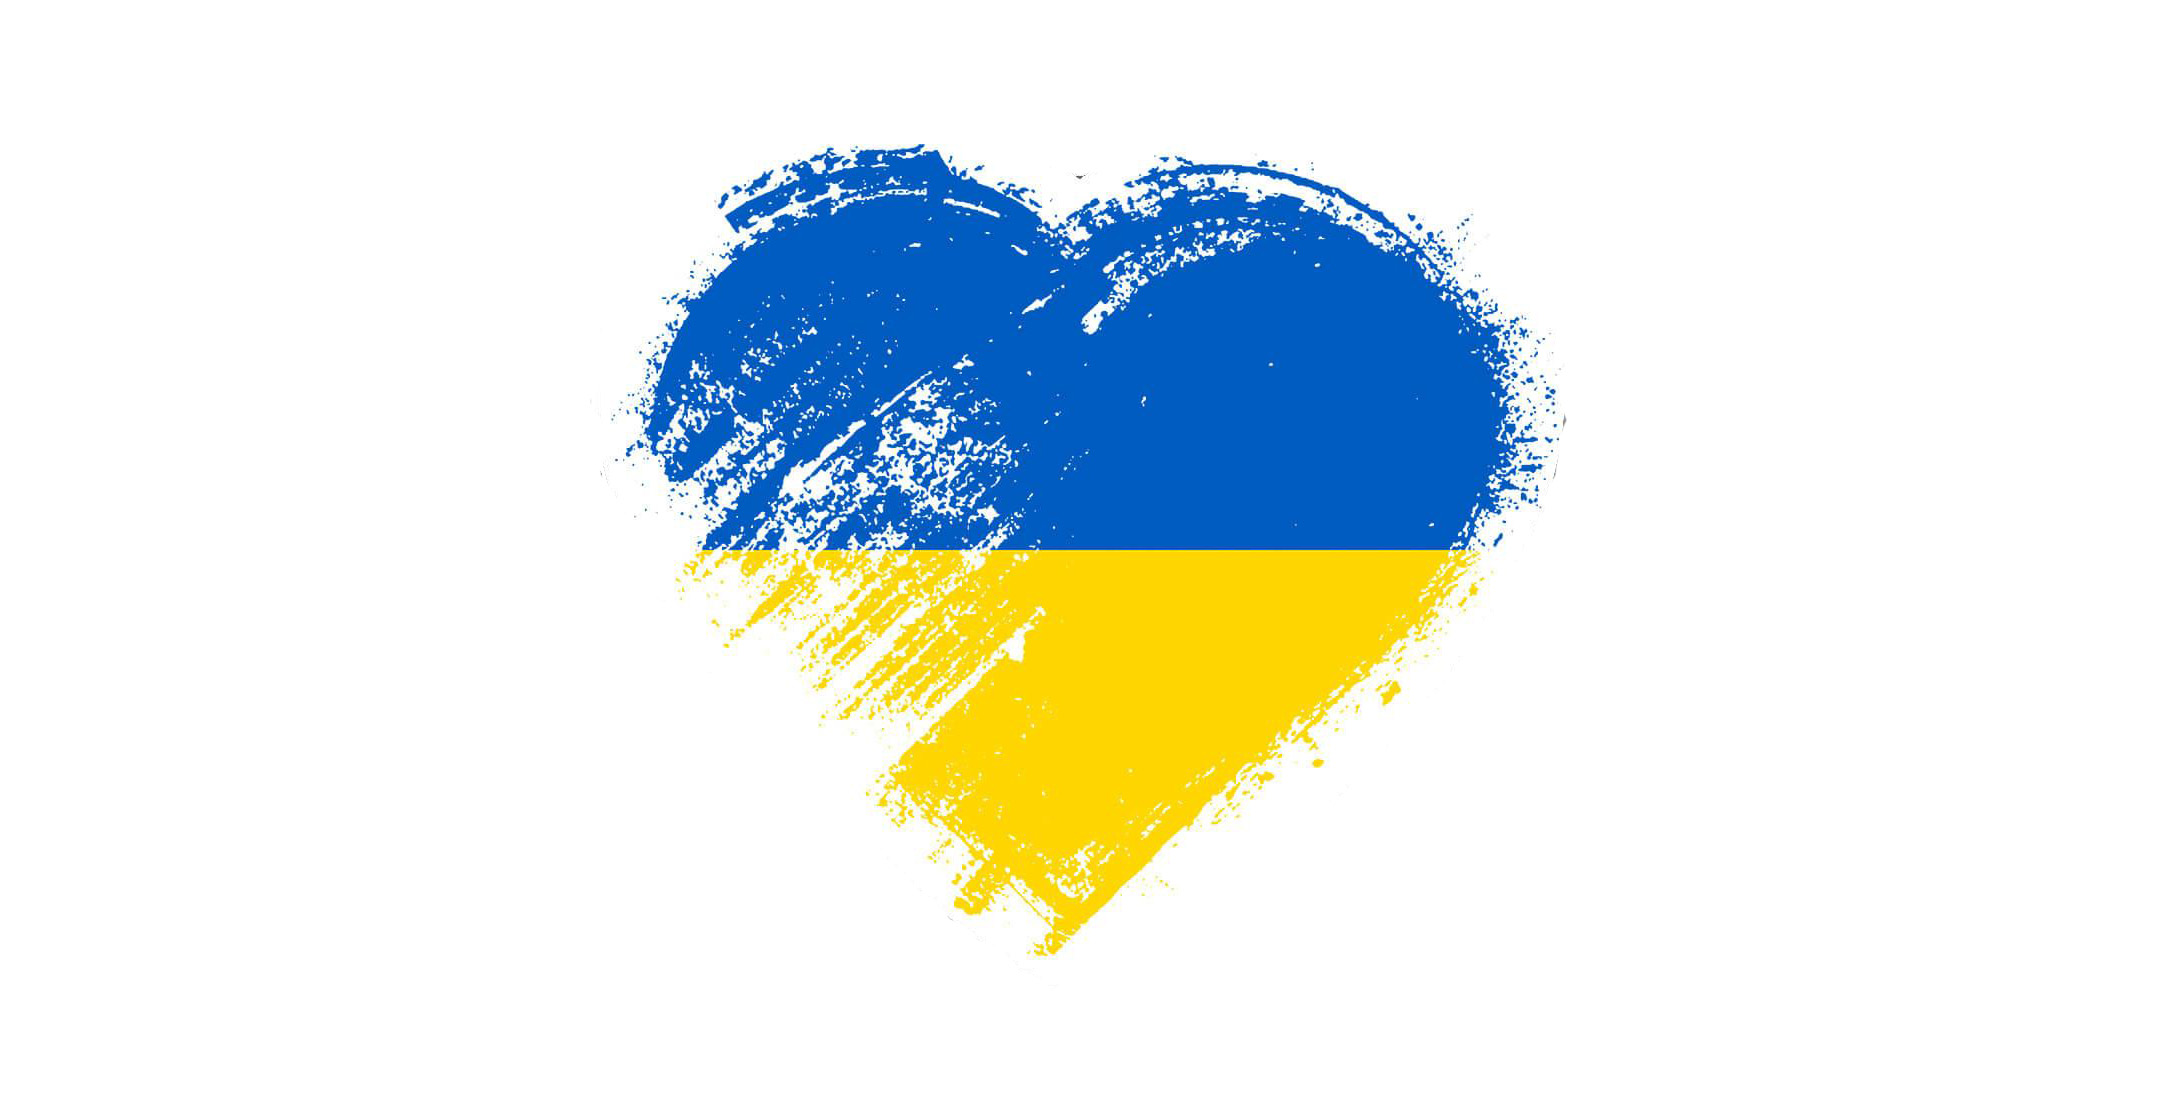 Heart in the colors of the Ukrainian flag, with blue on the top half and yellow on the bottom half, on a white background